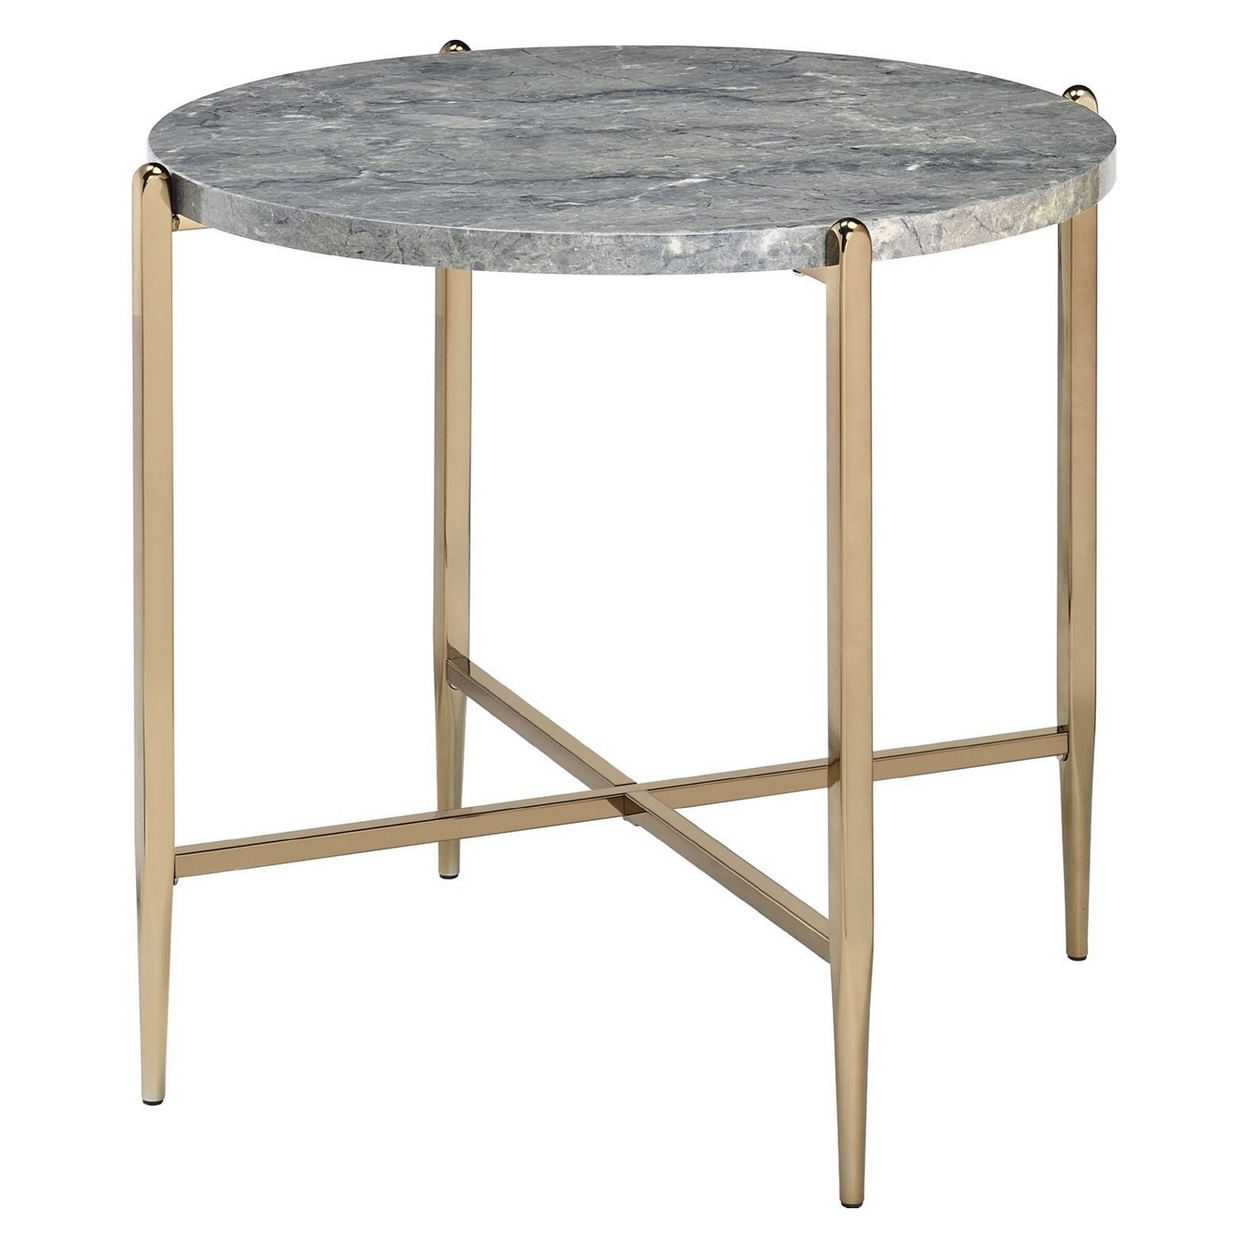 End Table With Oval Marble Top And X Shaped Support, Gray And Gold- Saltoro Sherpi